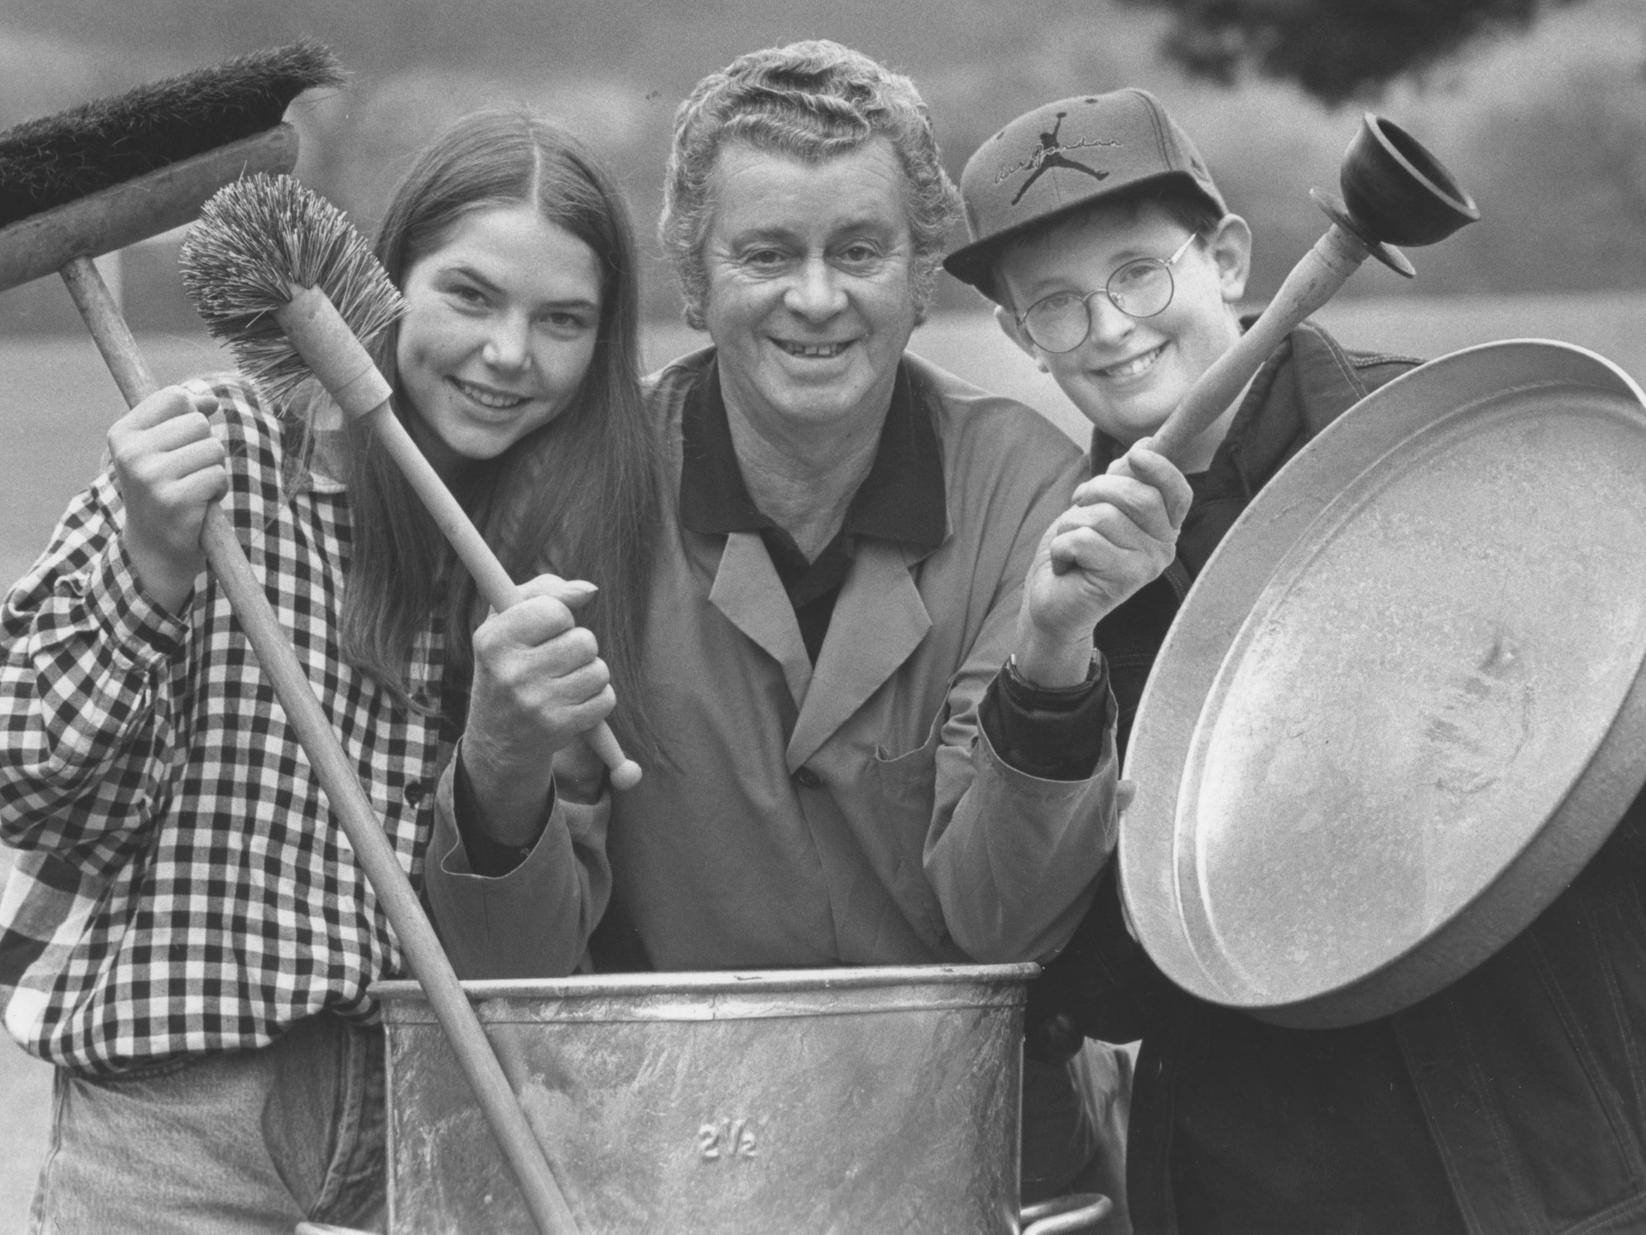 Graham School caretaker Fred Petch, who was to take a leading role in the school's forthcoming drama production in March 1994, is pictured with other cast members Katie Hardy, left, and James Cross.